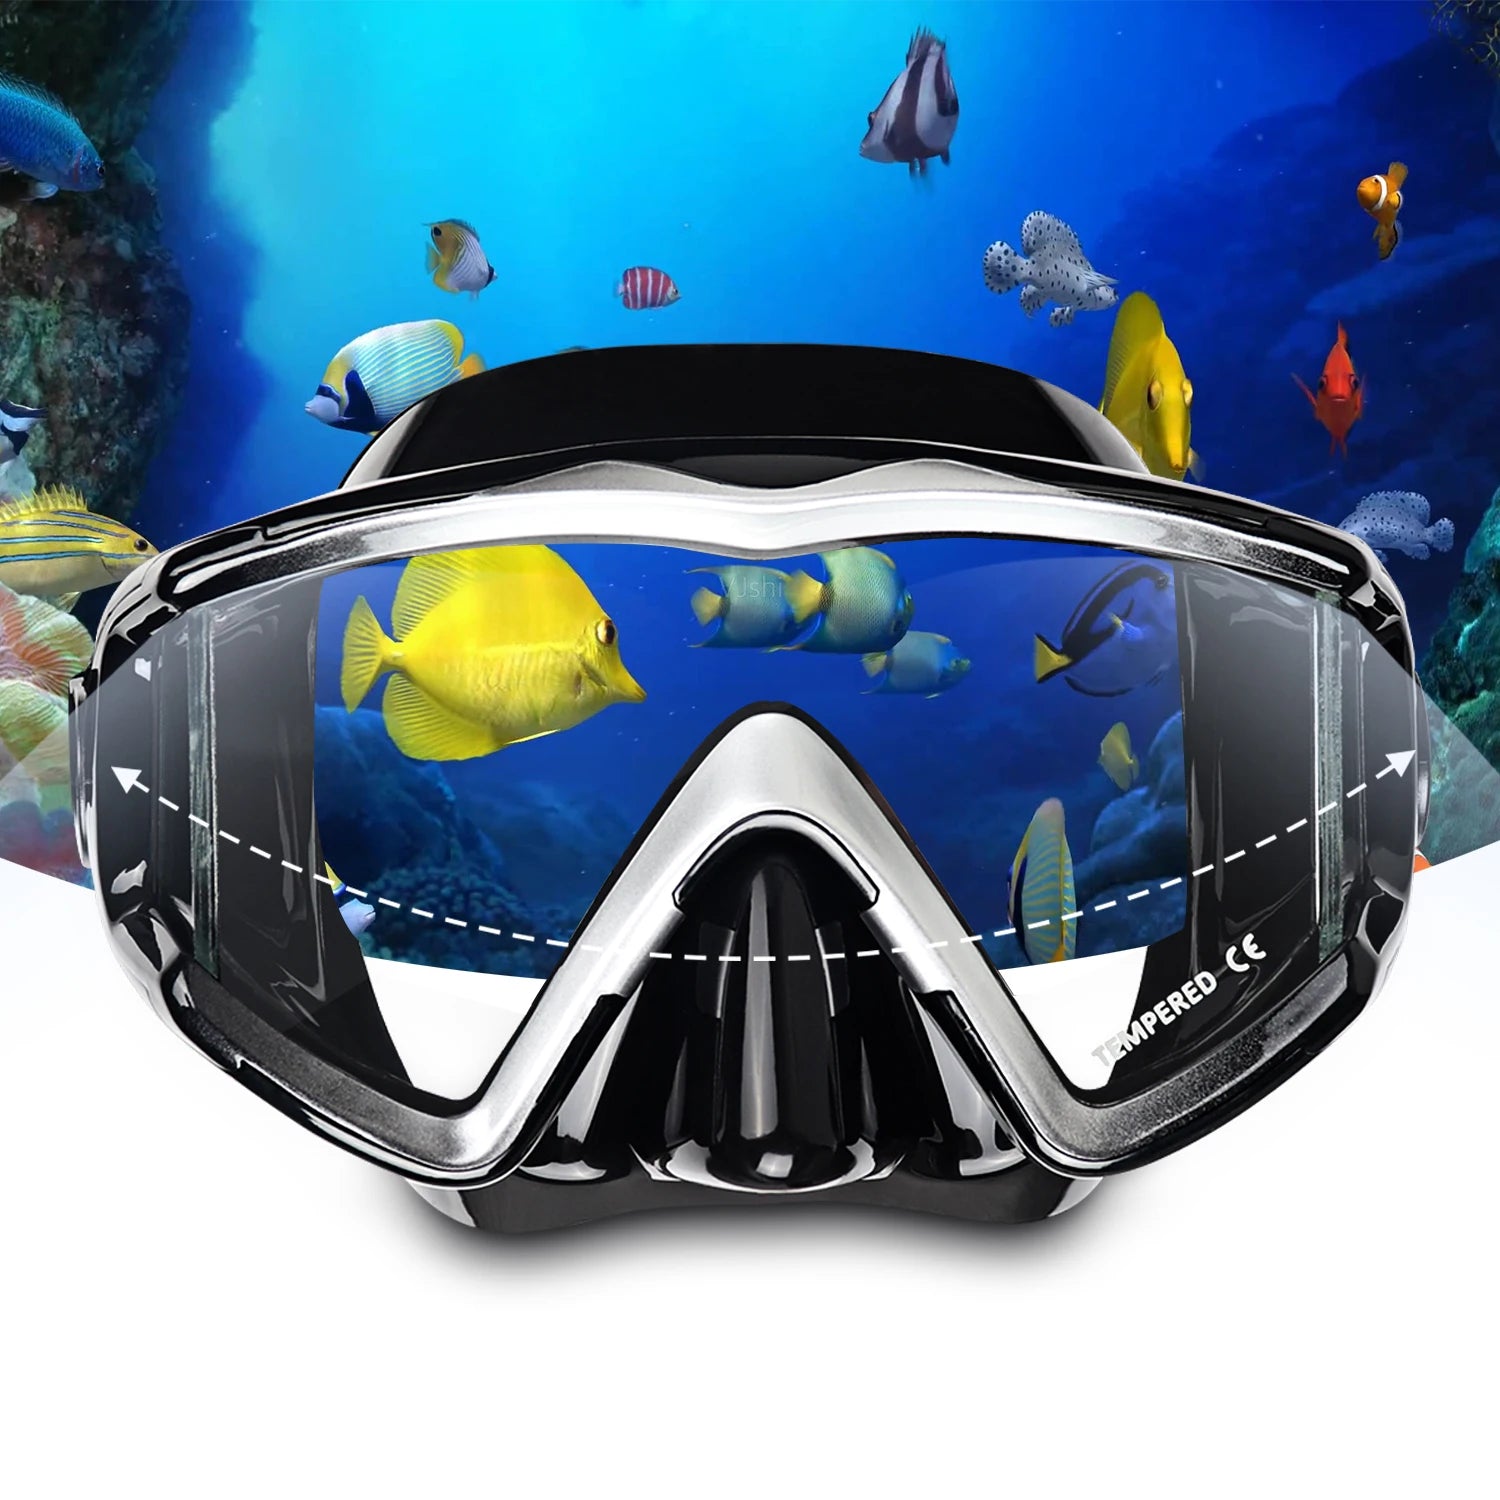 Adult Scuba Diving Mask Pano 3 Panoramic Tempered Glass Snorkeling Dive Mask, Premium Swim Goggles with Nose Cover Snorkeling